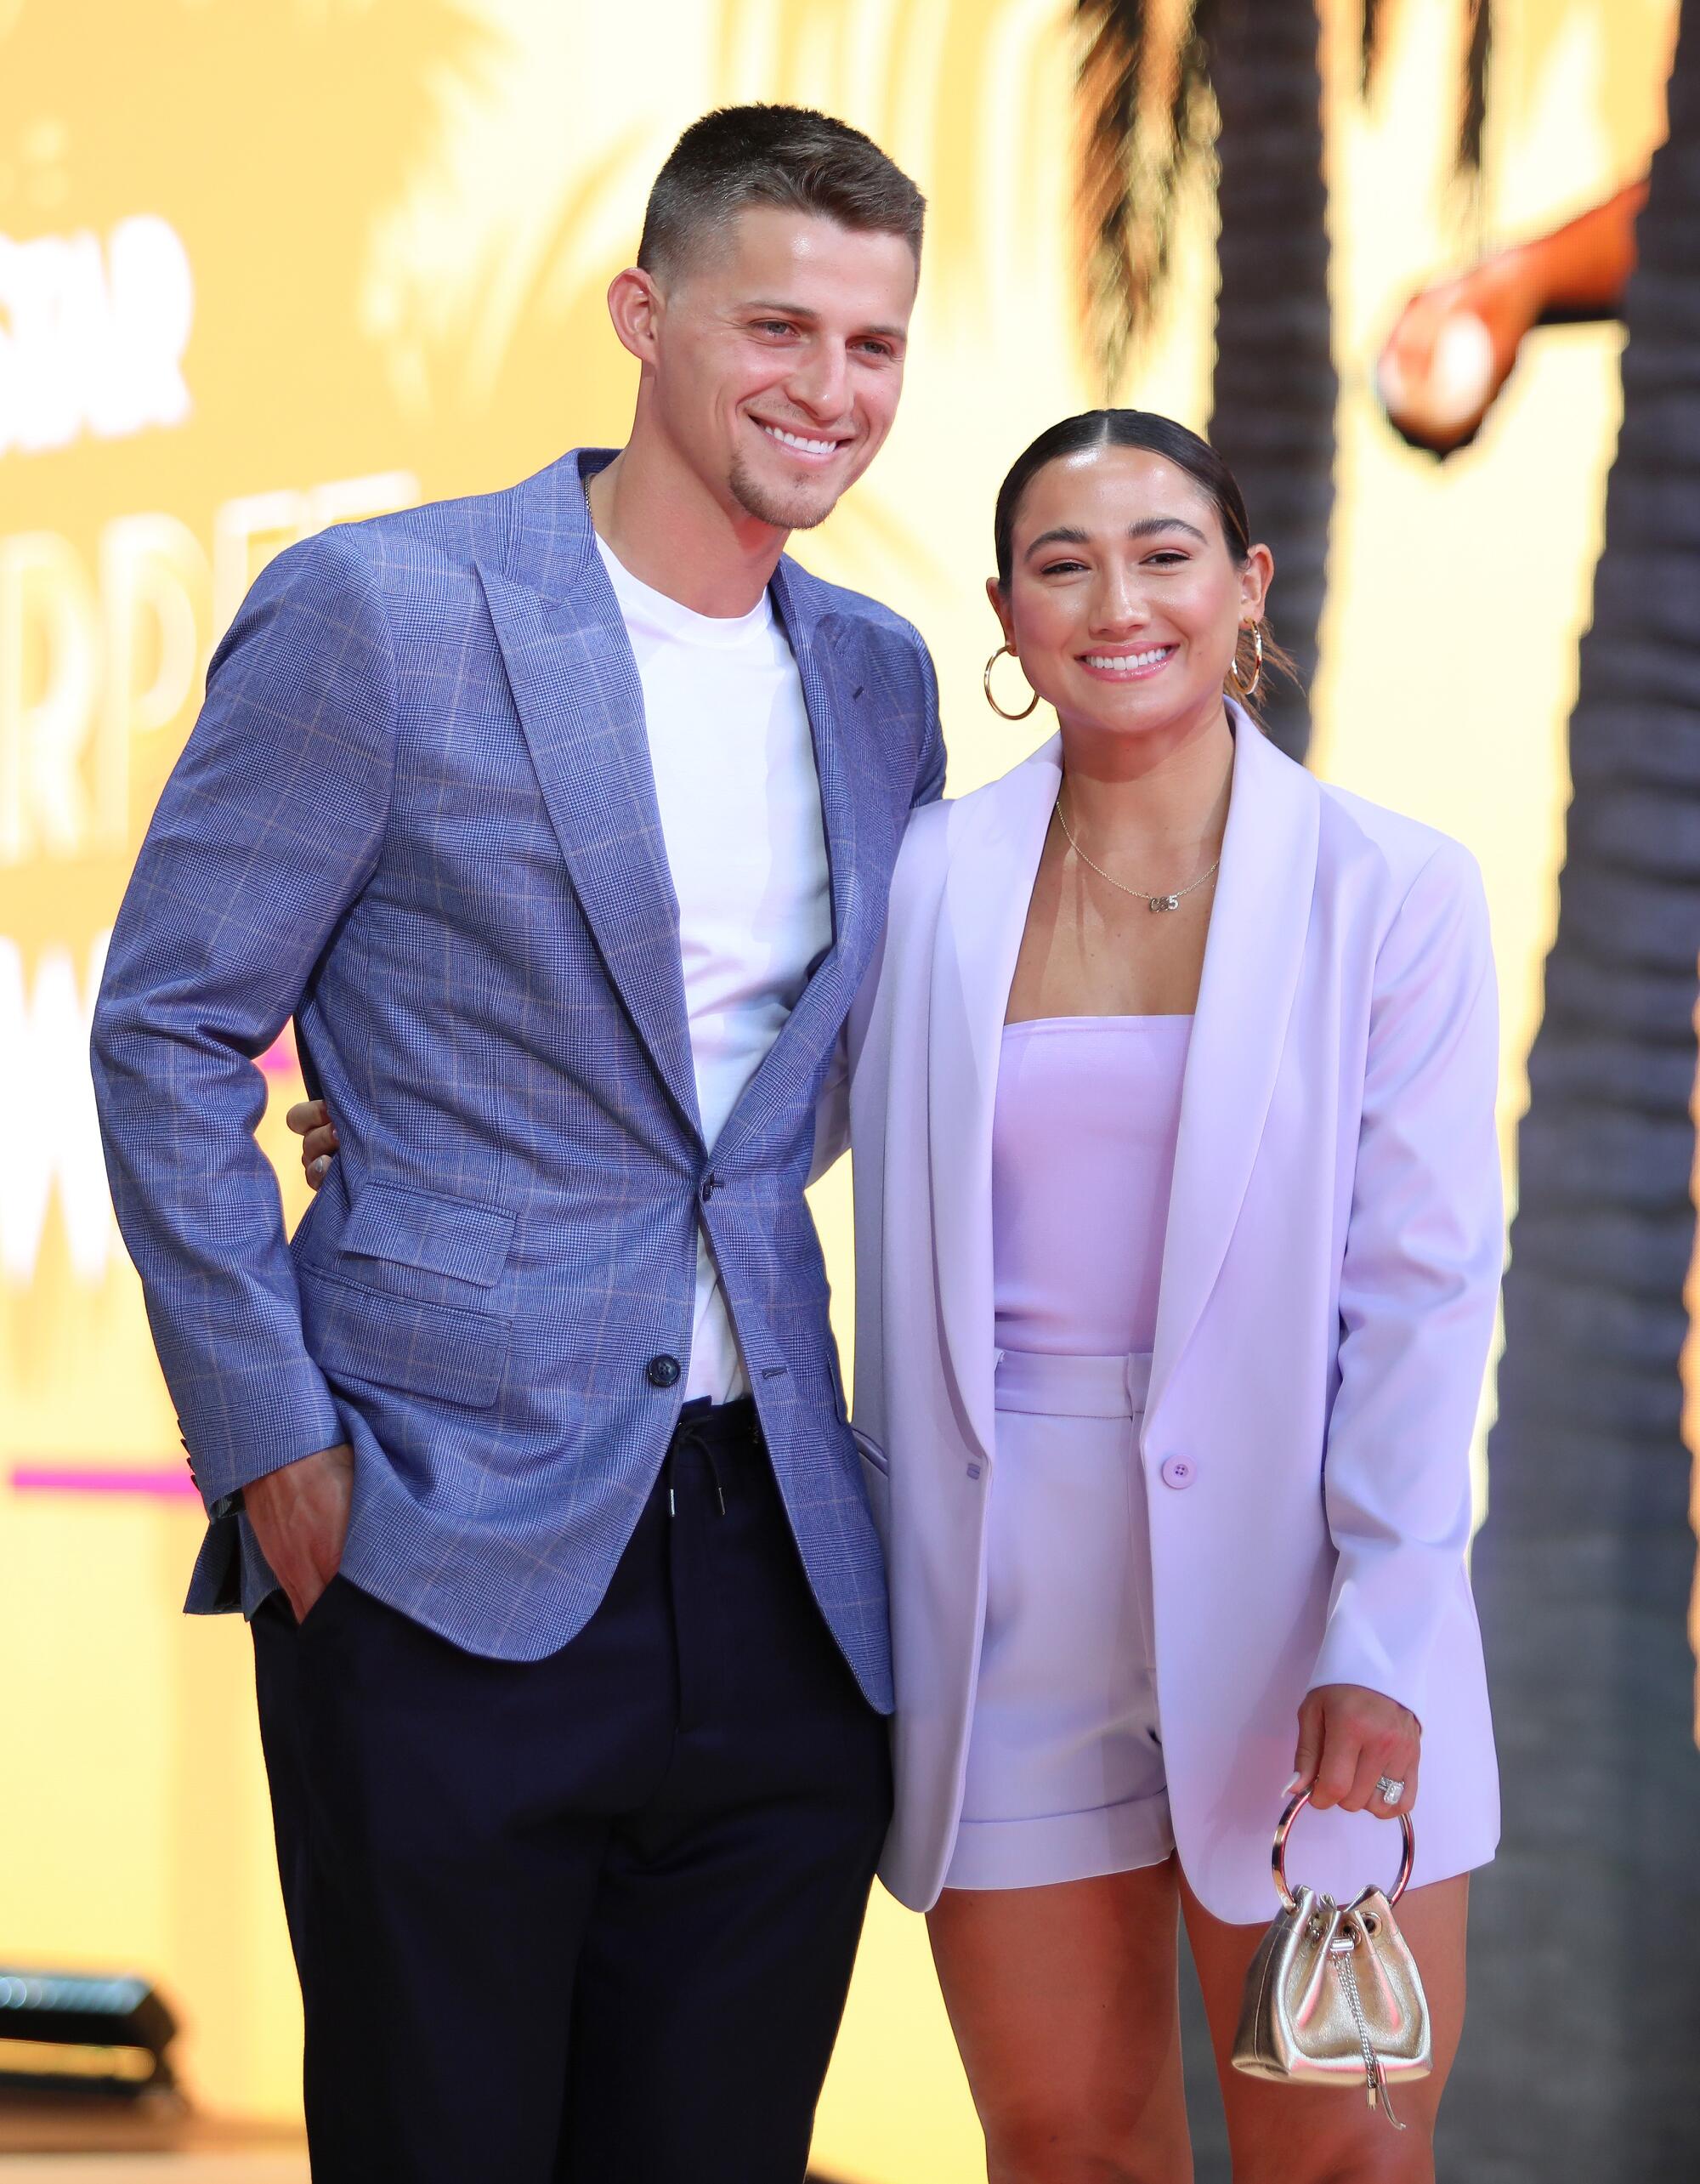 Corey Seager in a blue jacket and black pants arrives with a woman at the 2022 MLB All-Star Game Red Carpet Show.